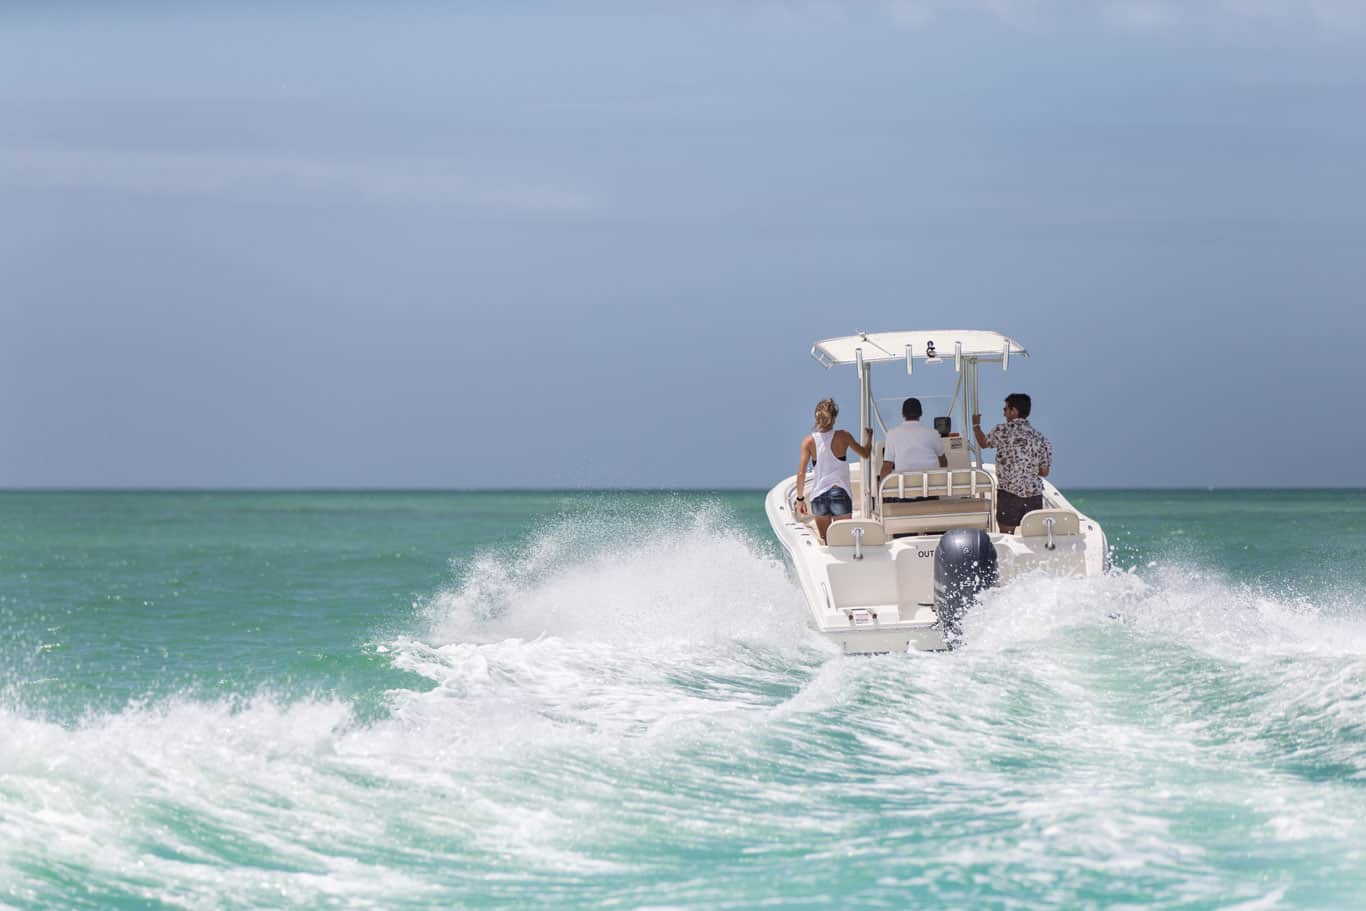 Image Courtesy of DiscoverBoating.com